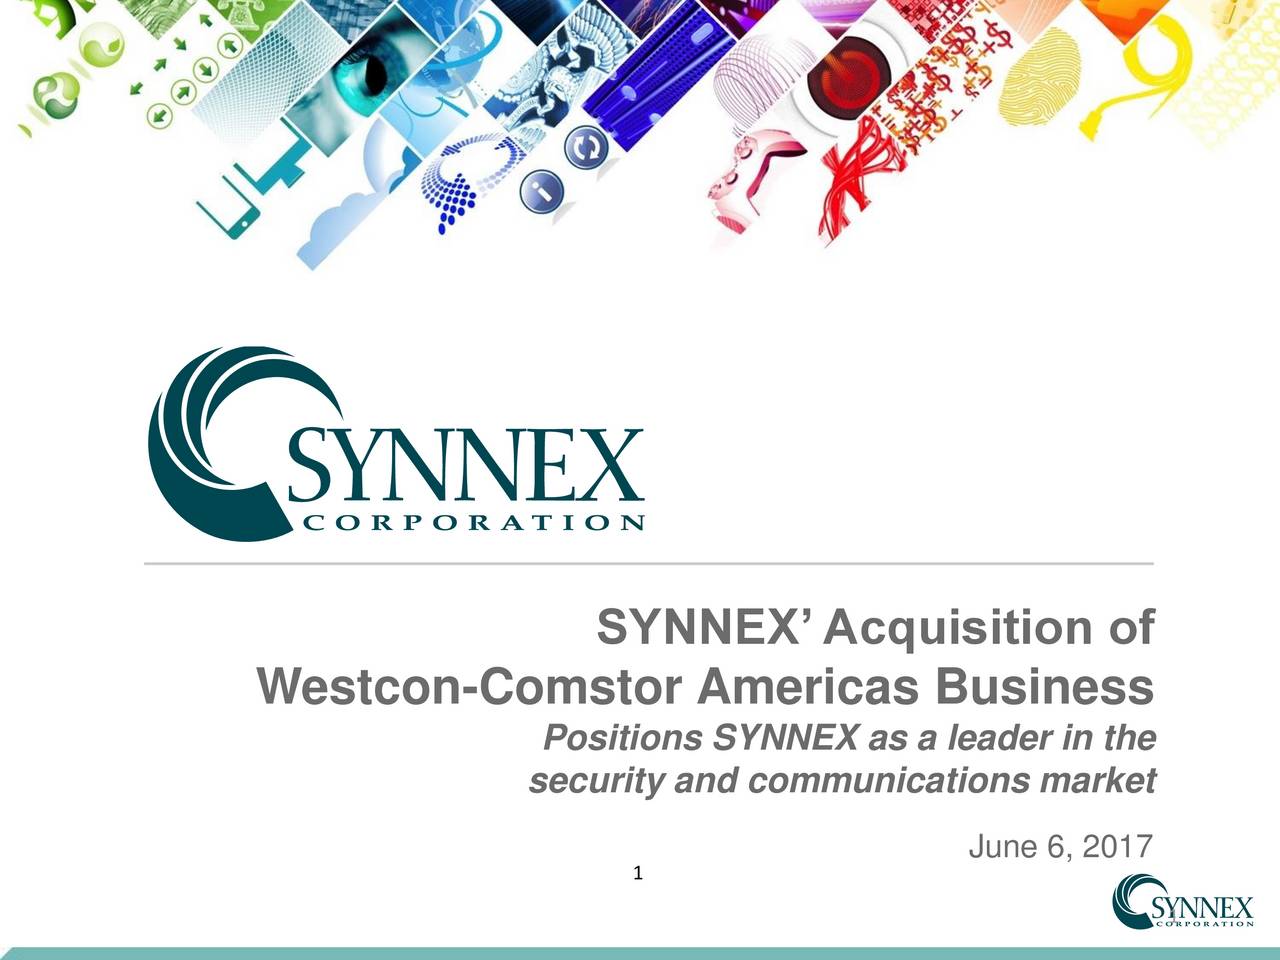 SYNNEX Logo - Synnex (SNX) Acquires Westcon Comstor Americas Business For $600M